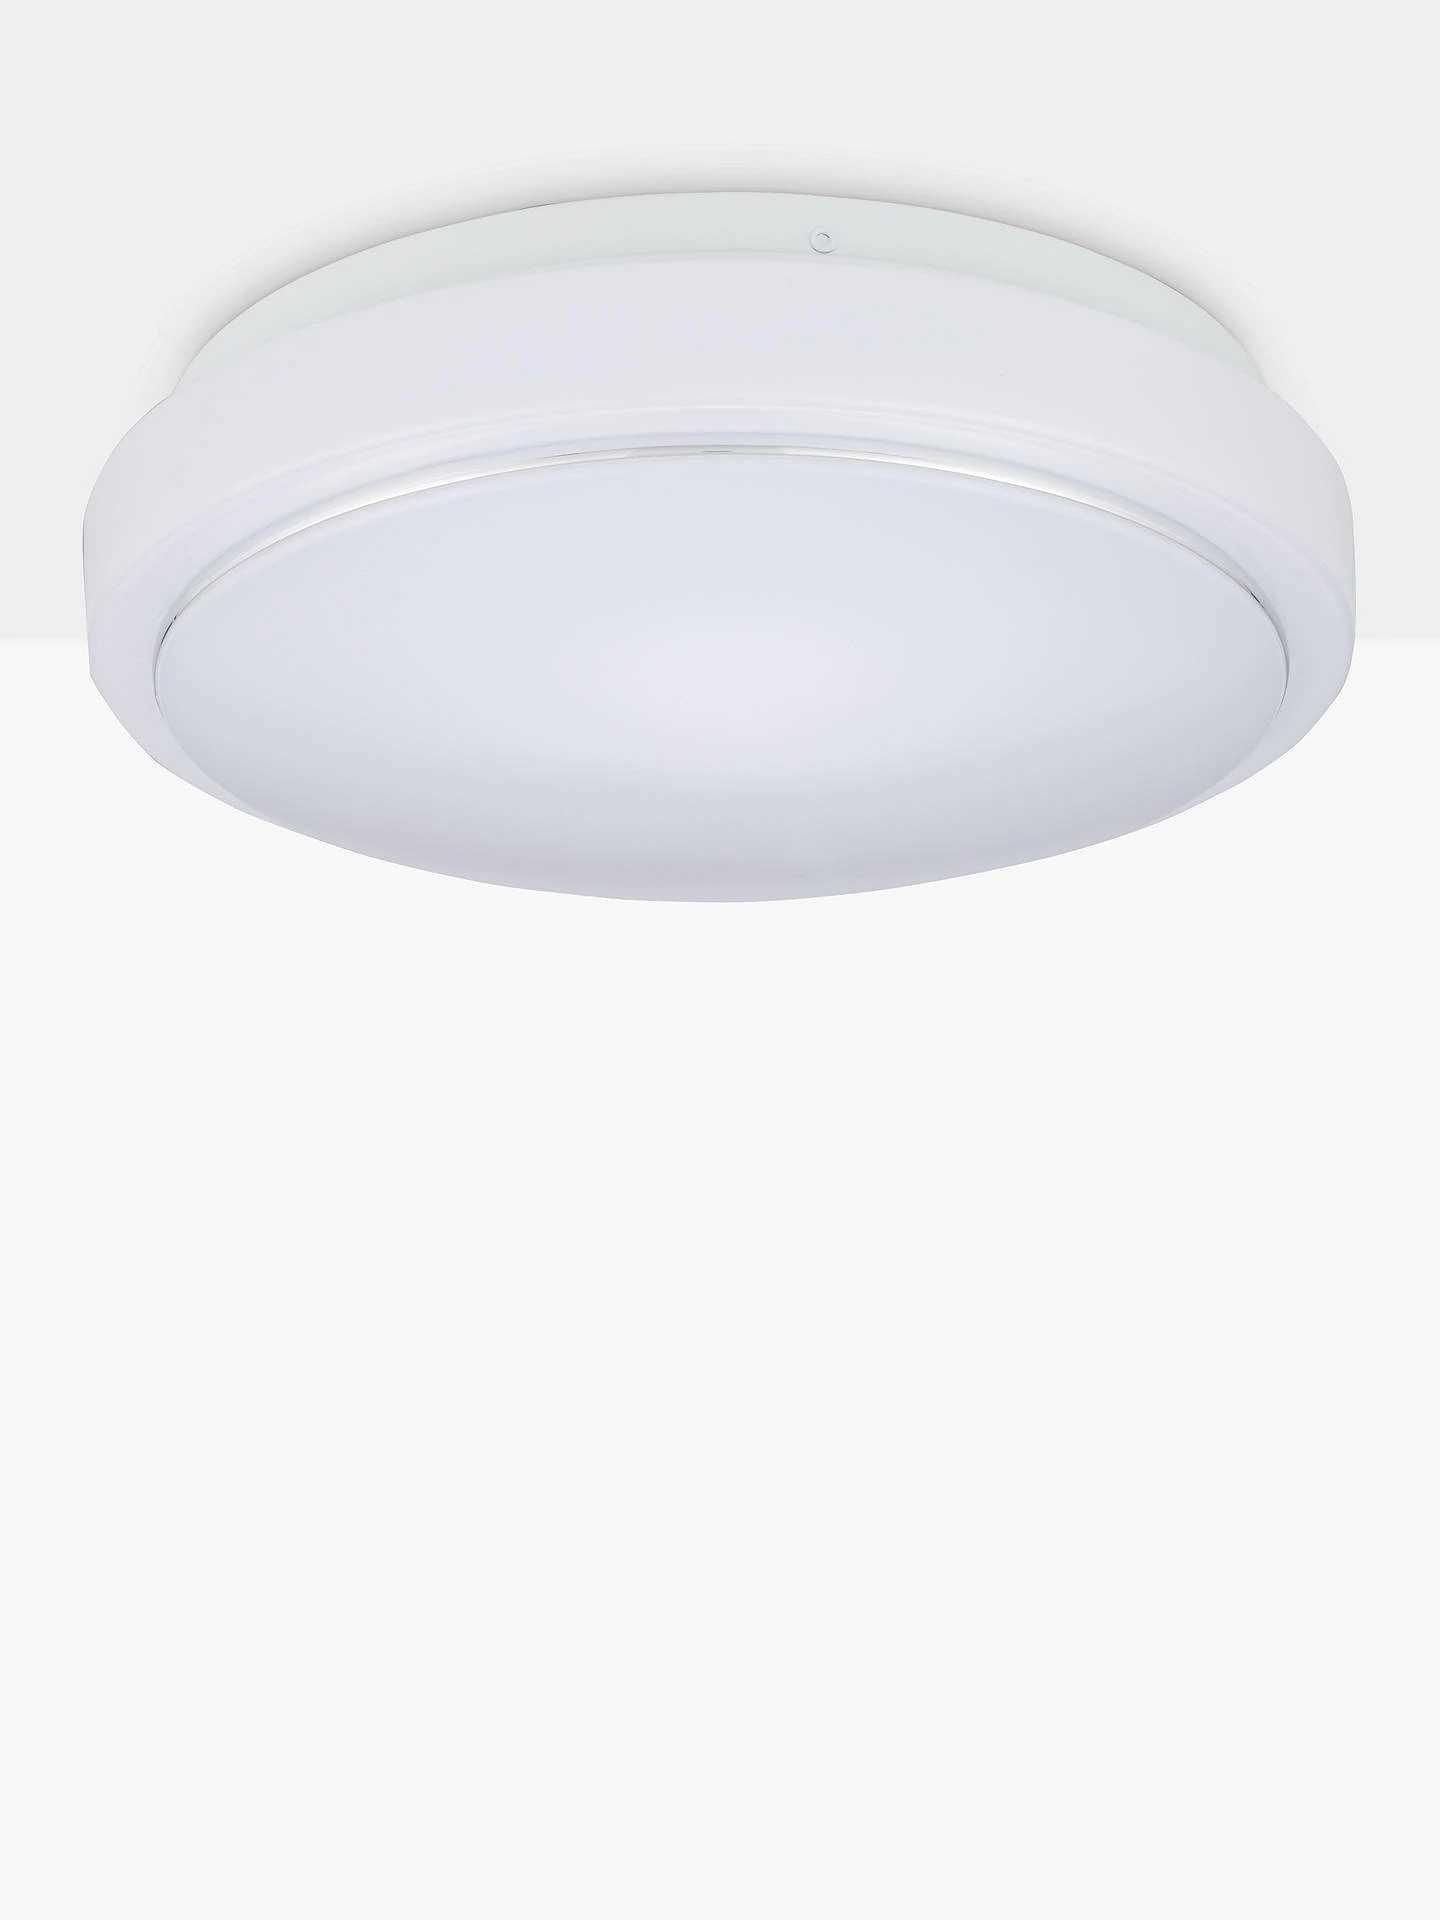 Rrp £90 Lot To Contain 3 Boxed Miles Flush Led Ceiling Lights